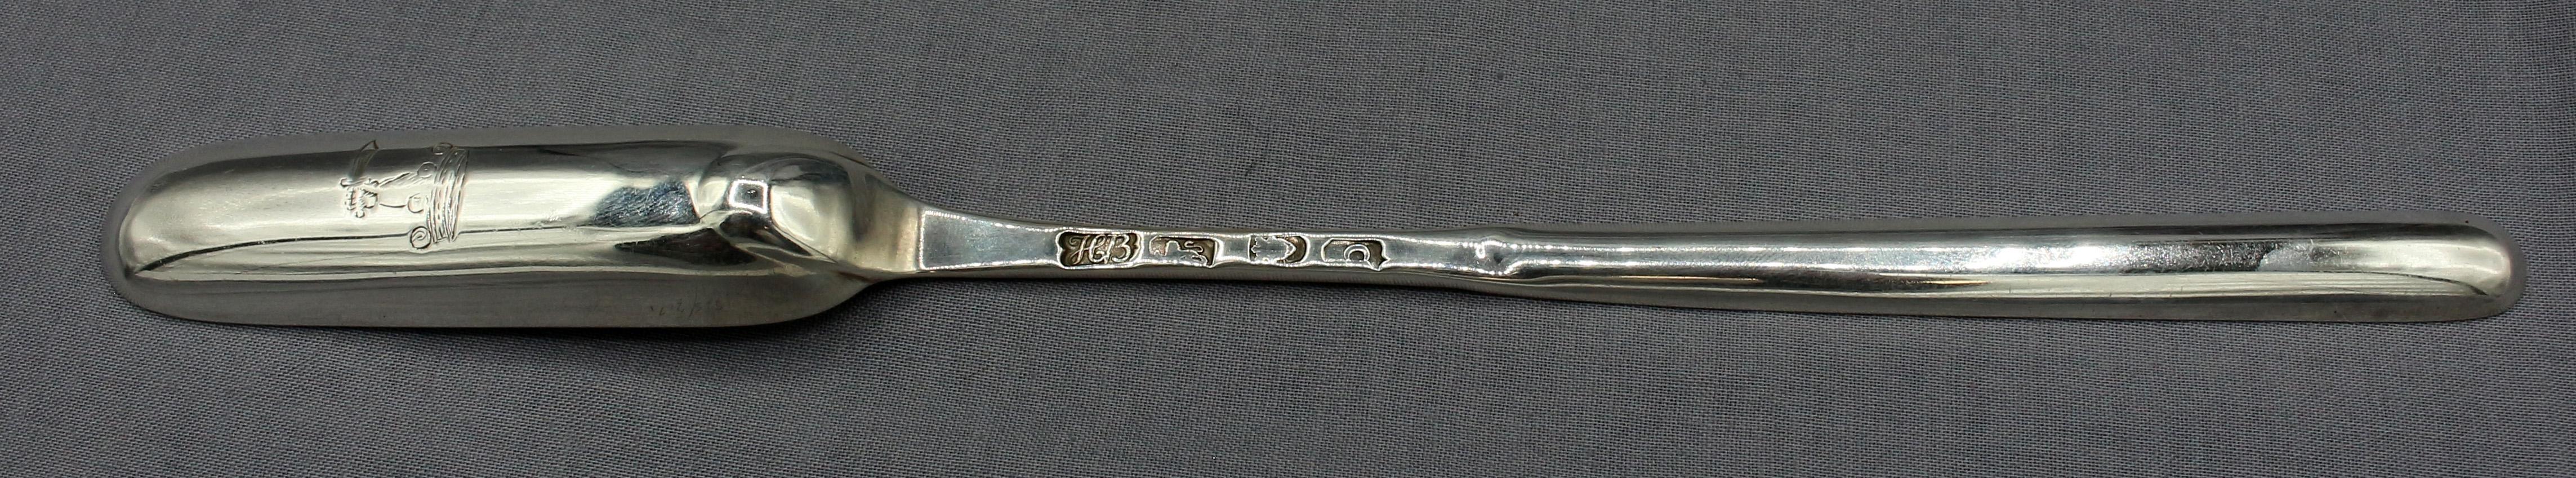 Sterling silver marrow scoop by Hester Bateman, London, 1777. Rolls Family Crest: out of a ducal coronet an arm from elbow, in armor, brandishing a saber (Fairbairn, p115 #5). Old English pattern. Fine condition. 1.40 troy oz.
9.5